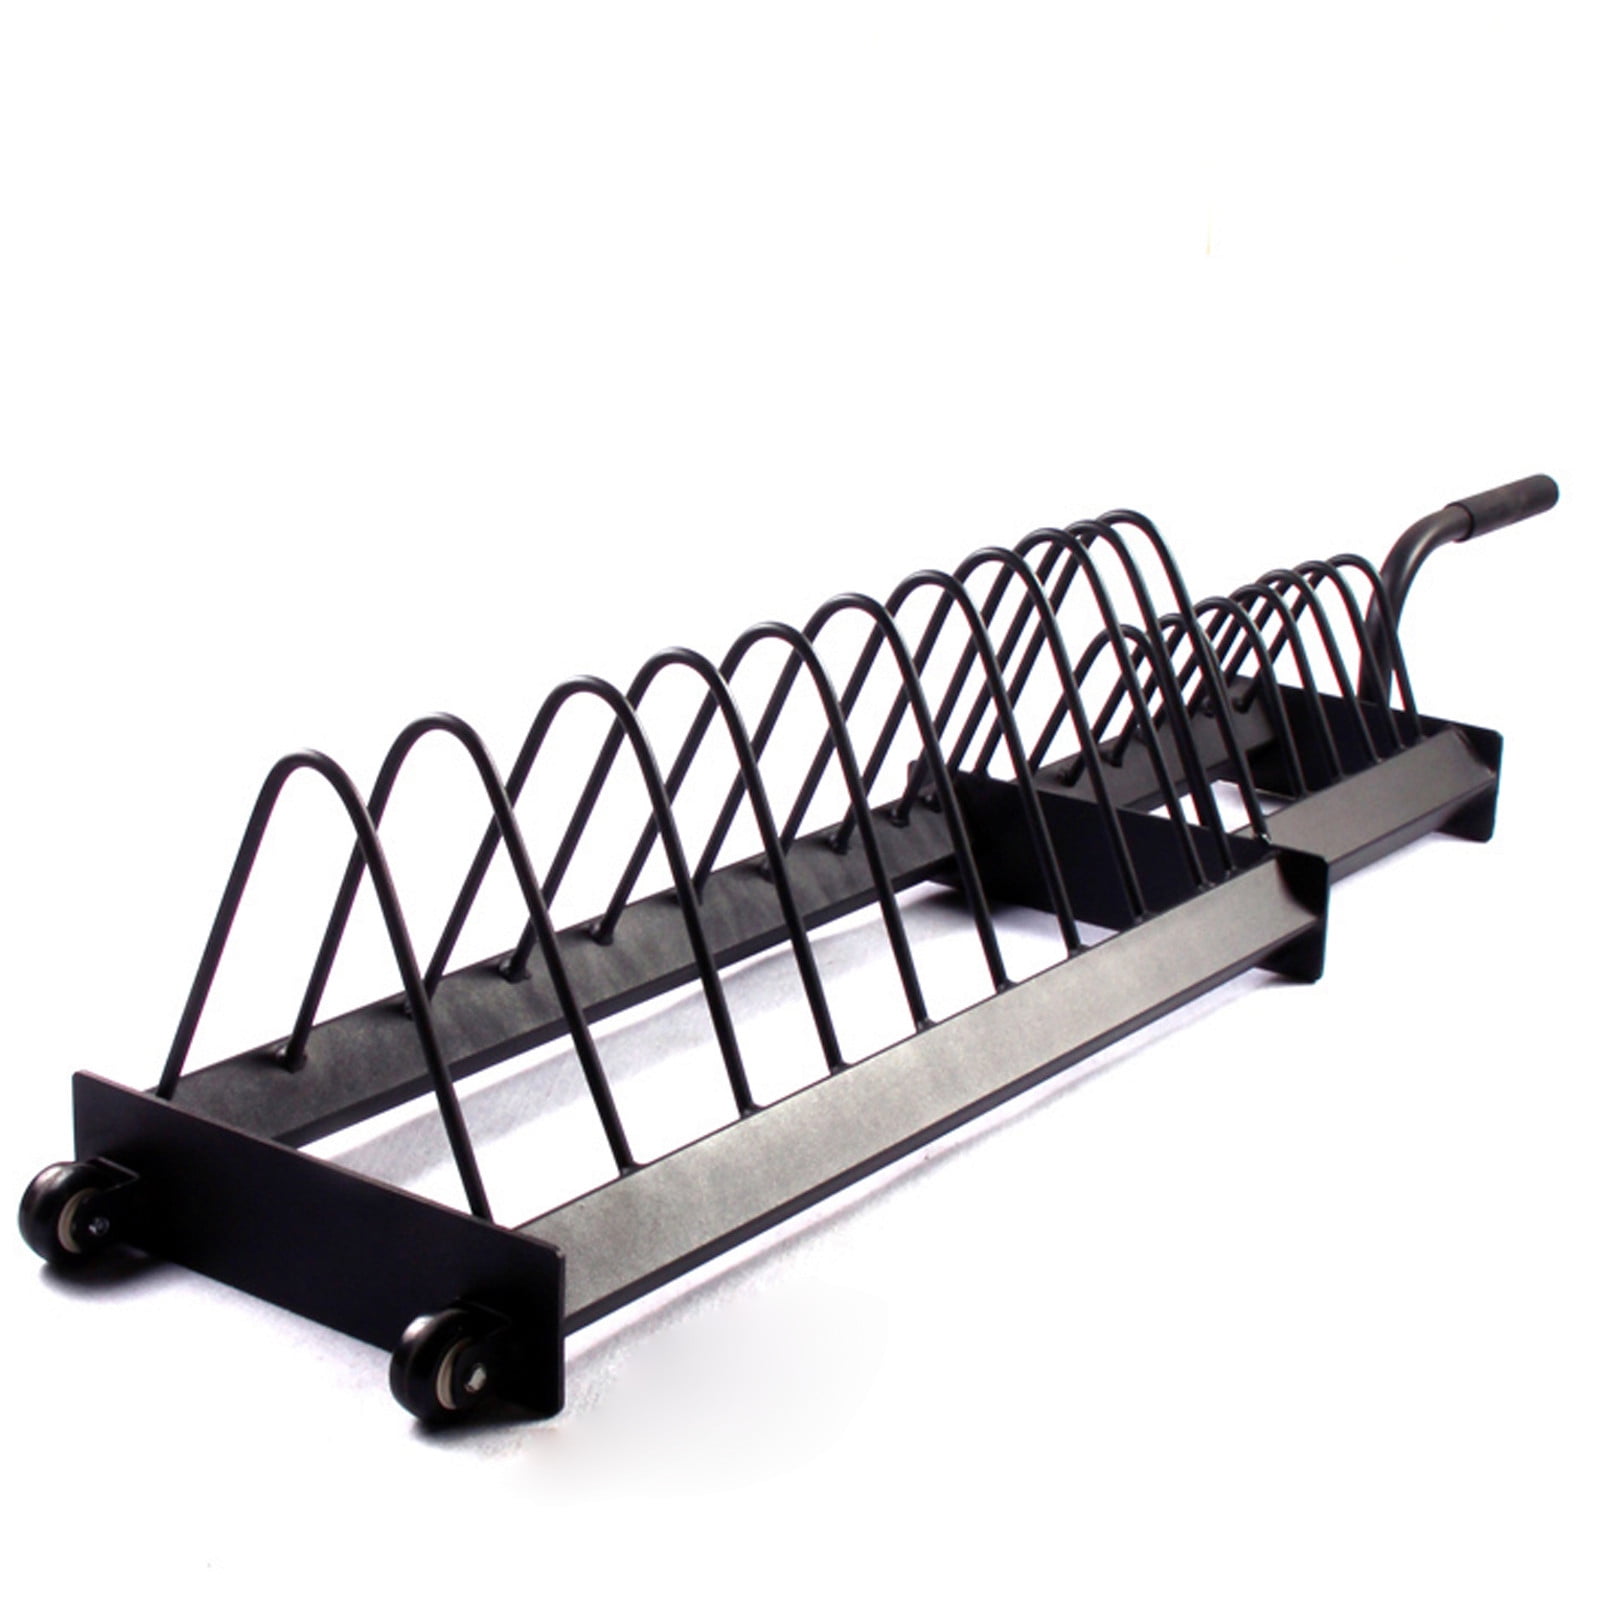 Details about   Bar Rack Plate Rack Weight Rack With 2 Inch Barbell Holder Stands For Home Gym 